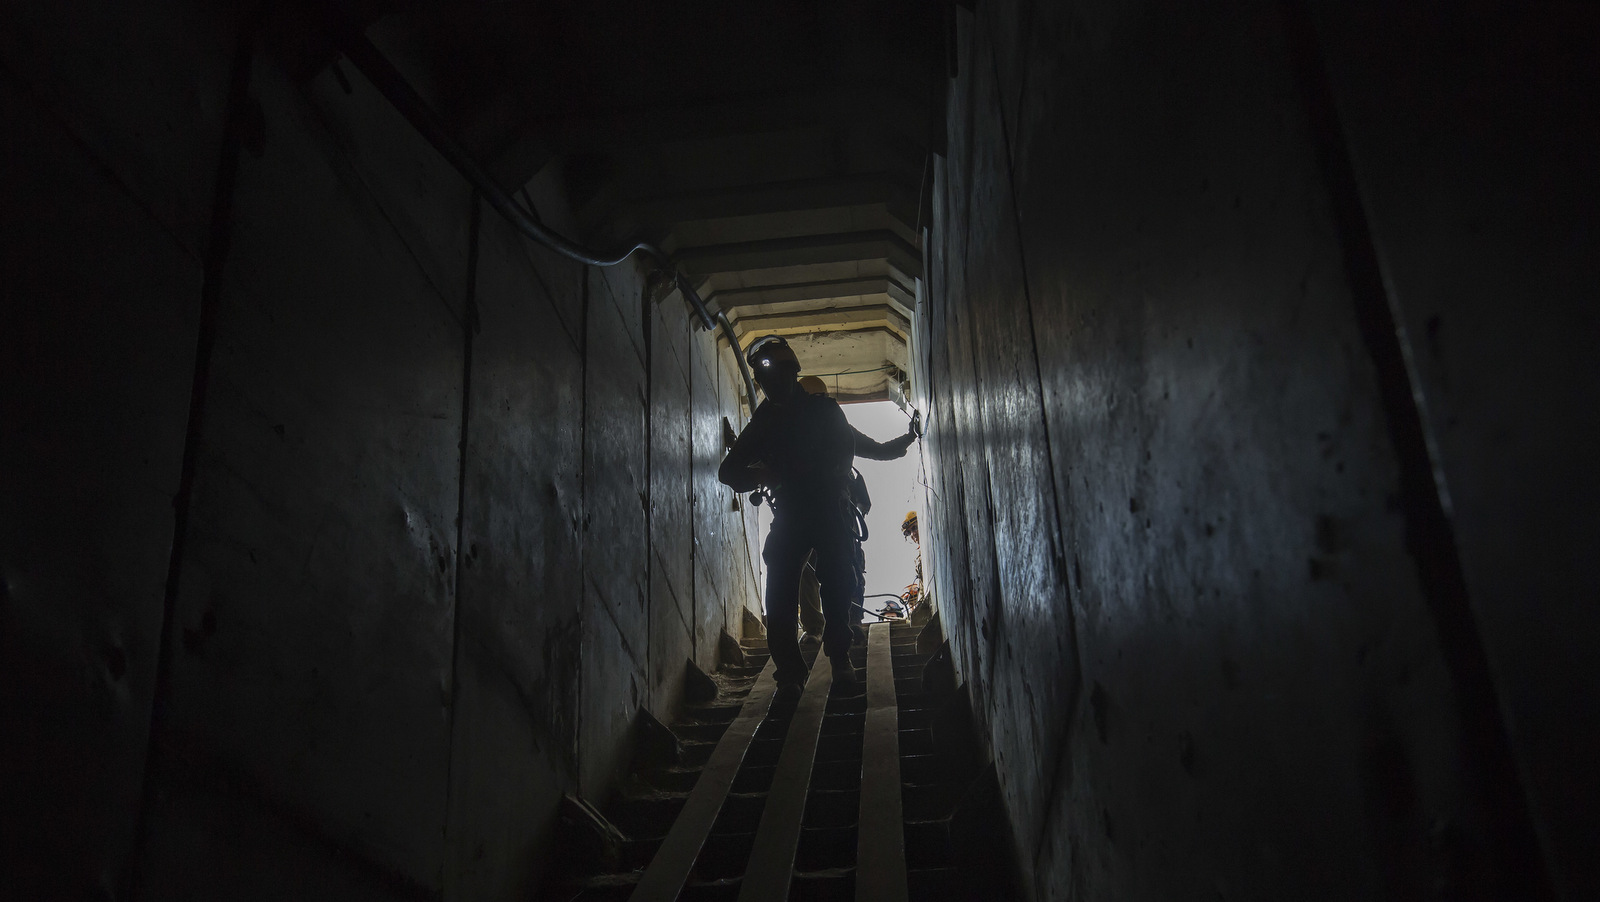 Israeli soldiers from the Home Front Command enter a tunnel, to attend to a soldier acting as a survivor in the smoke and rubble, during an army drill near the Israel Gaza border, Nov. 7, 2016. (AP/Tsafrir Abayov)